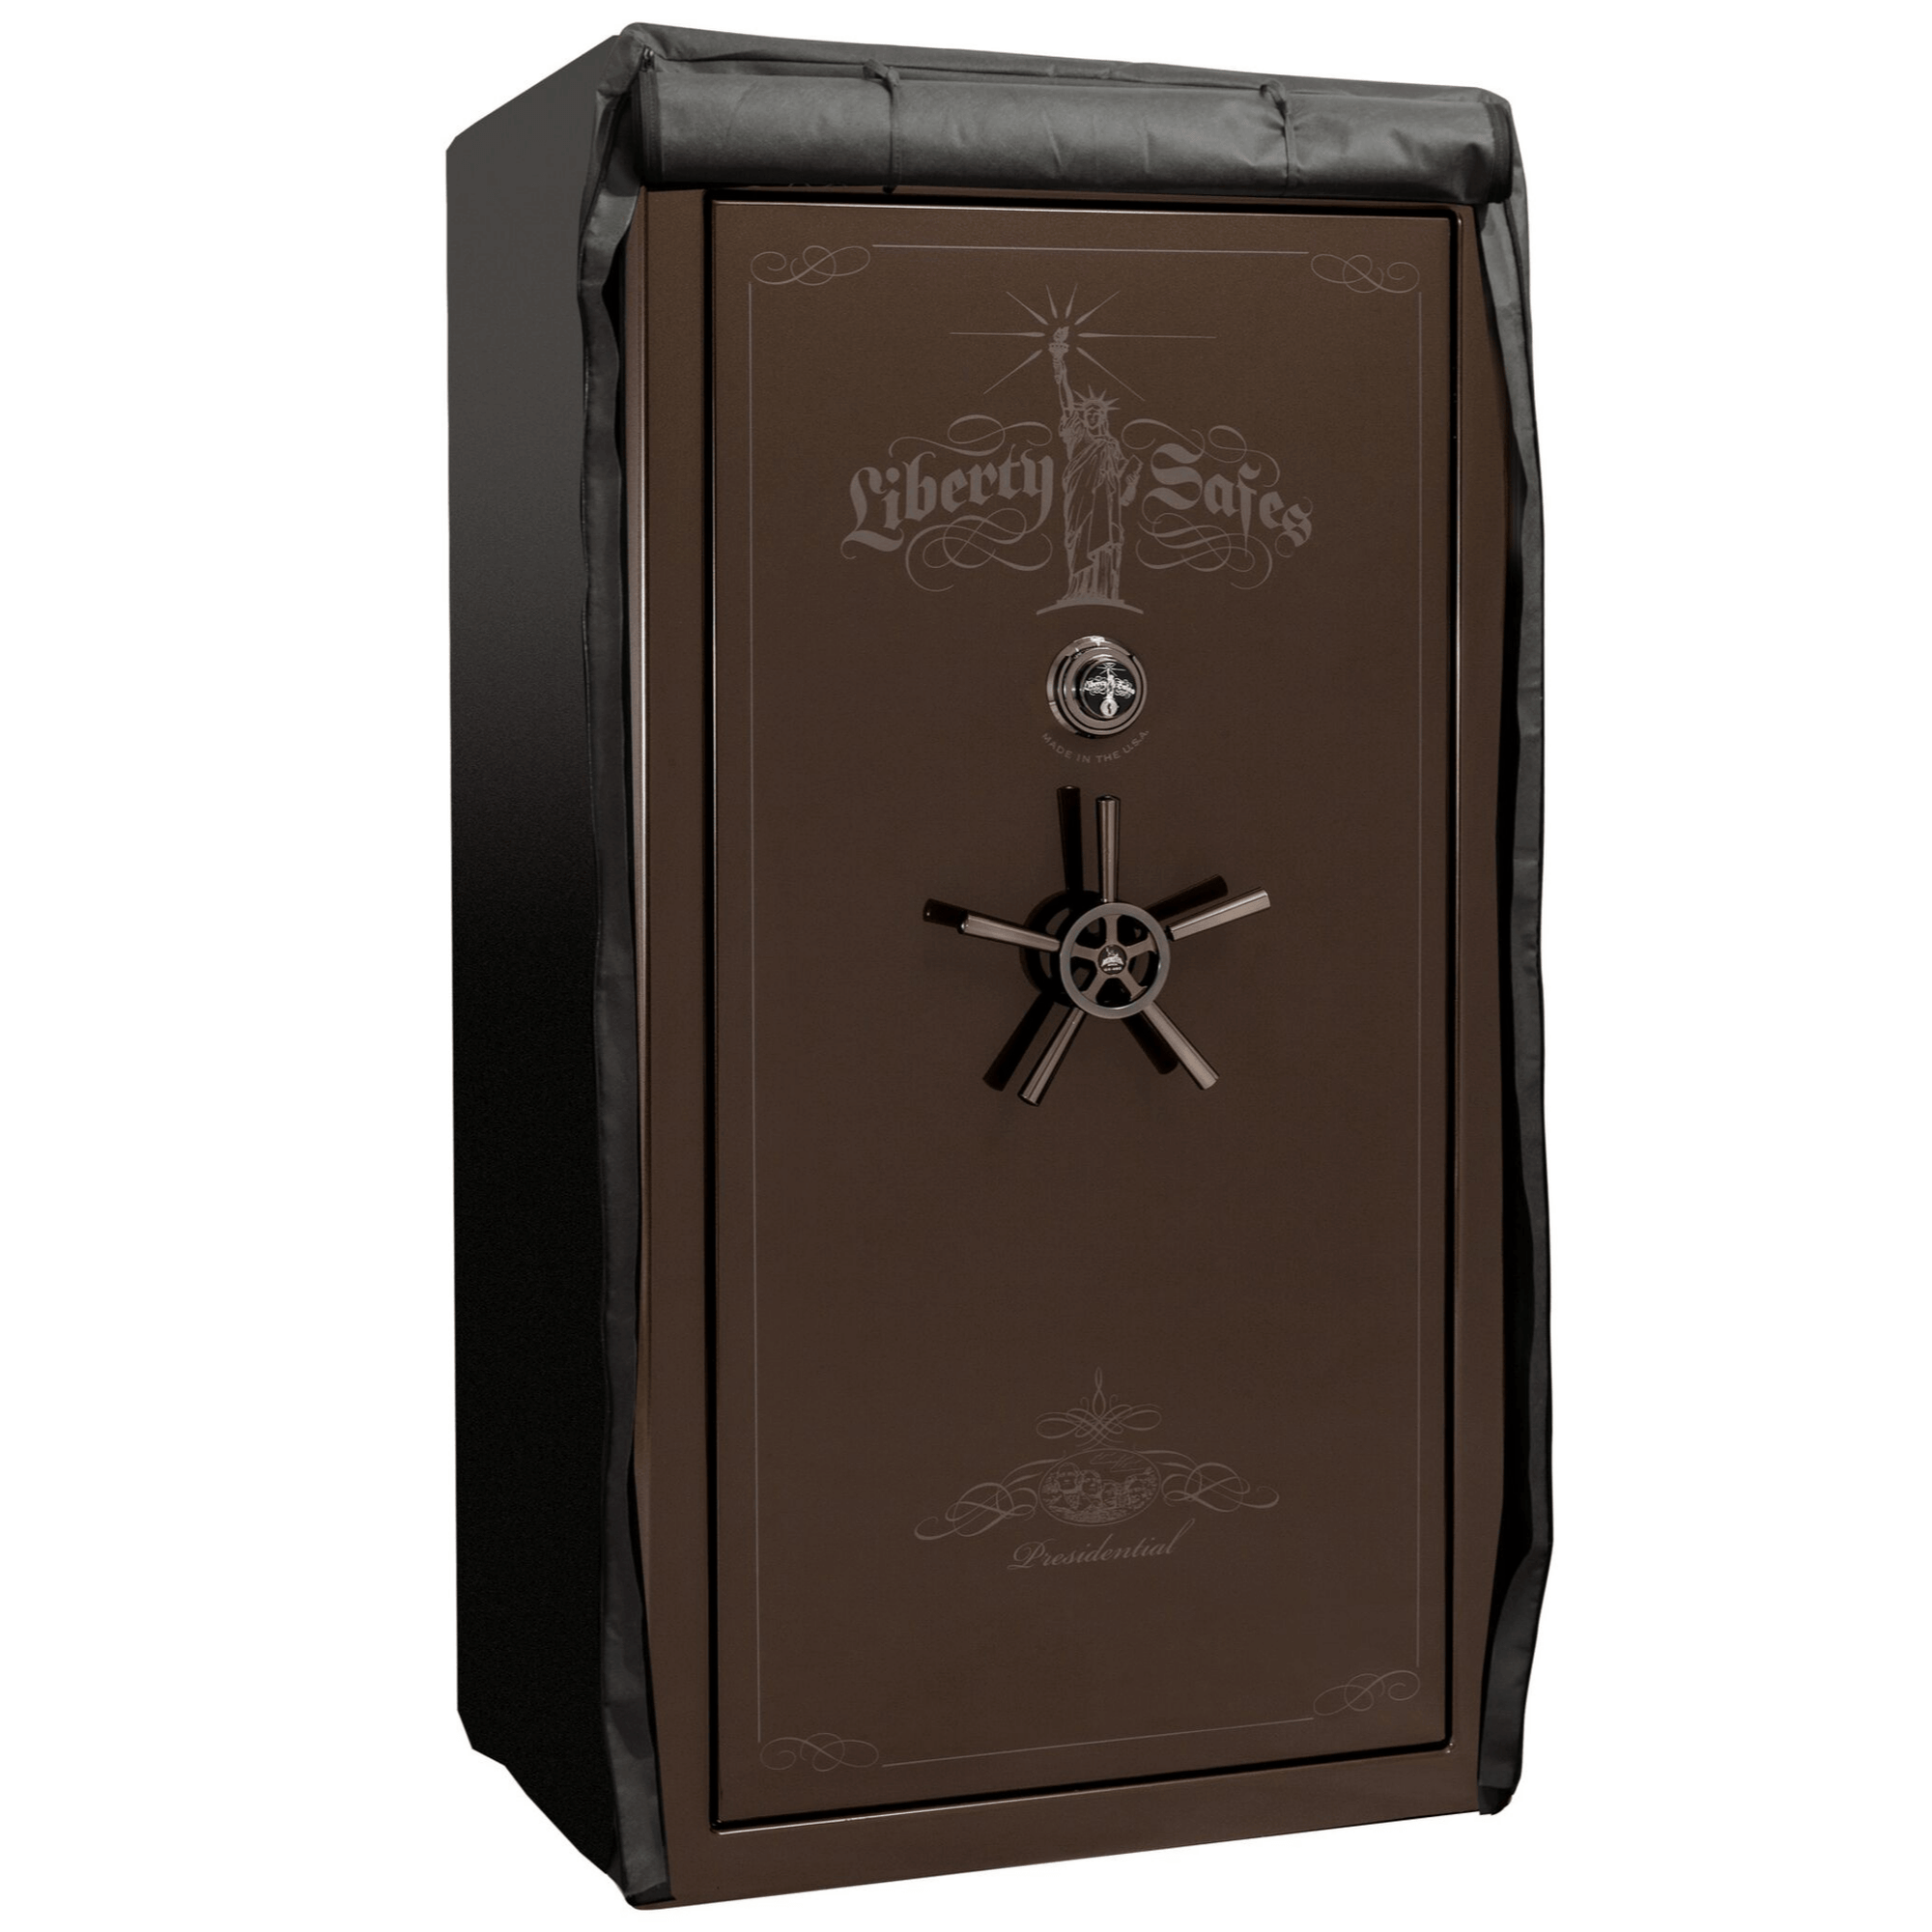 Accessory - Security - Safe Cover - 40 size safes | Liberty Safe Norcal.